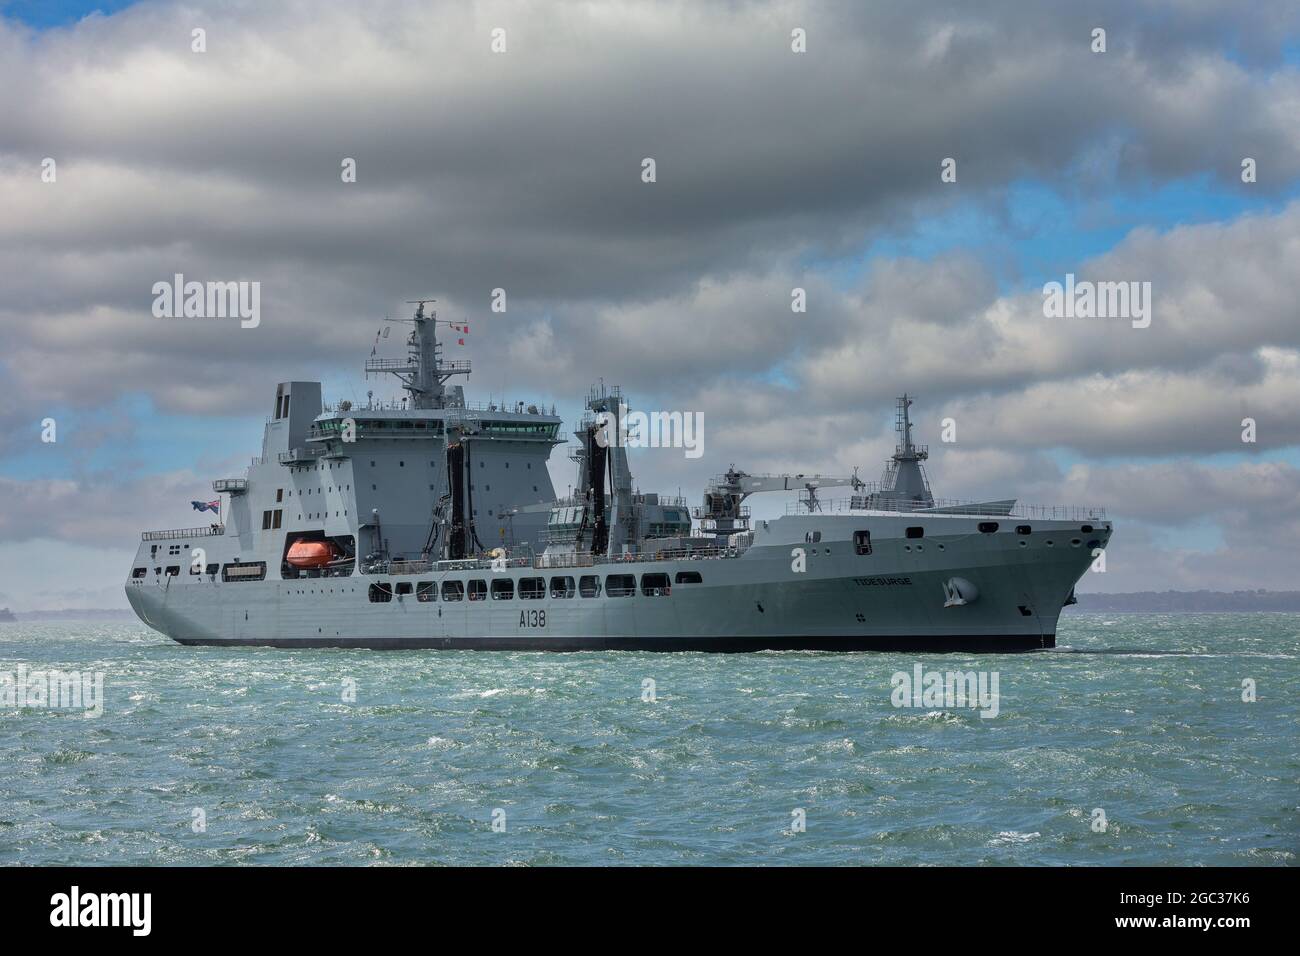 Tide Class RFA Tidesurge (A138) arriving in Portsmouth Naval Base. A modern fleet support ship providing logistics and refuelling. Stock Photo